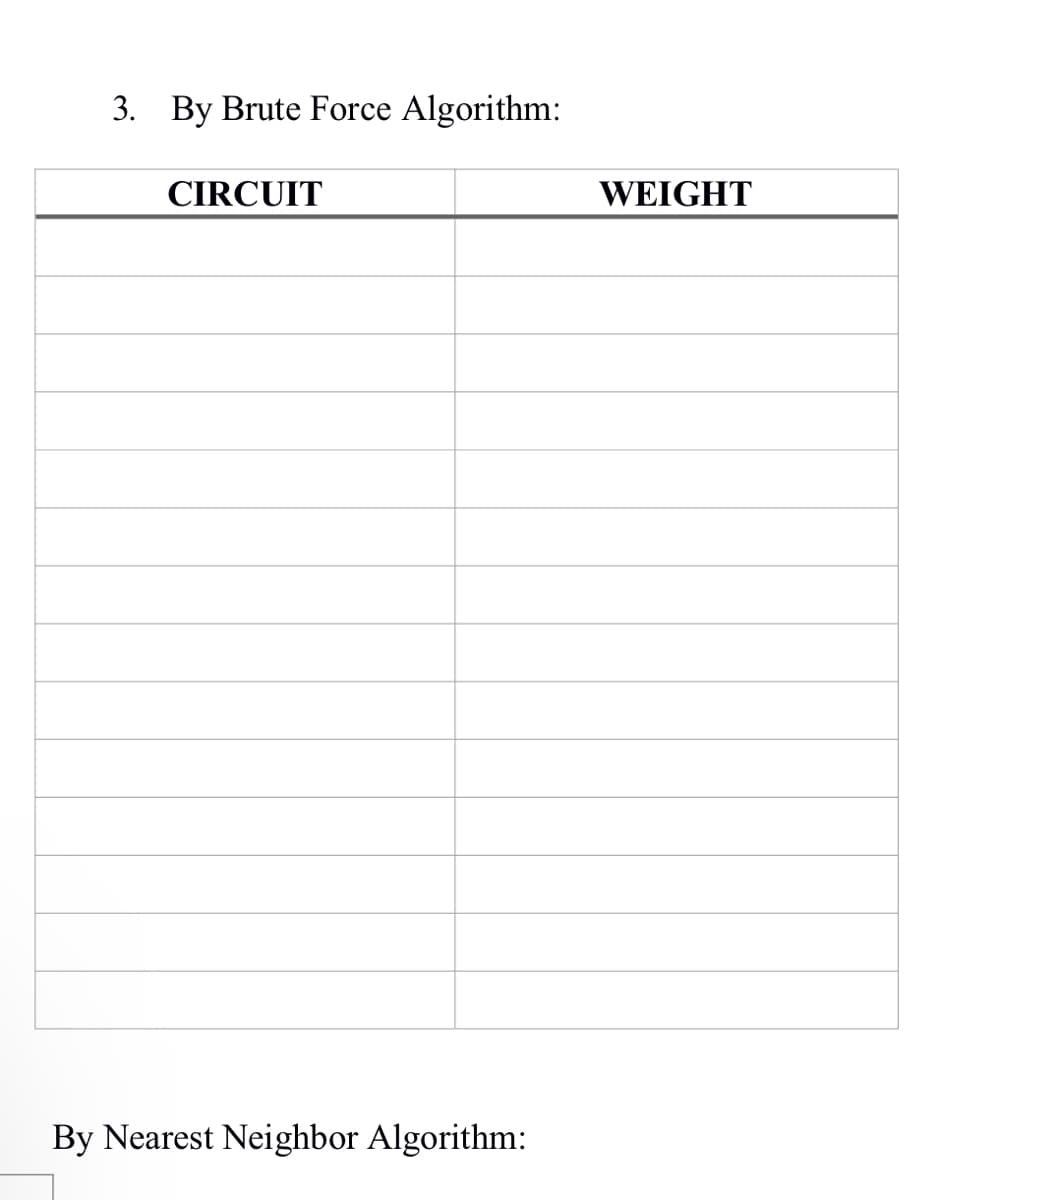 3. By Brute Force Algorithm:
CIRCUIT
By Nearest Neighbor Algorithm:
WEIGHT